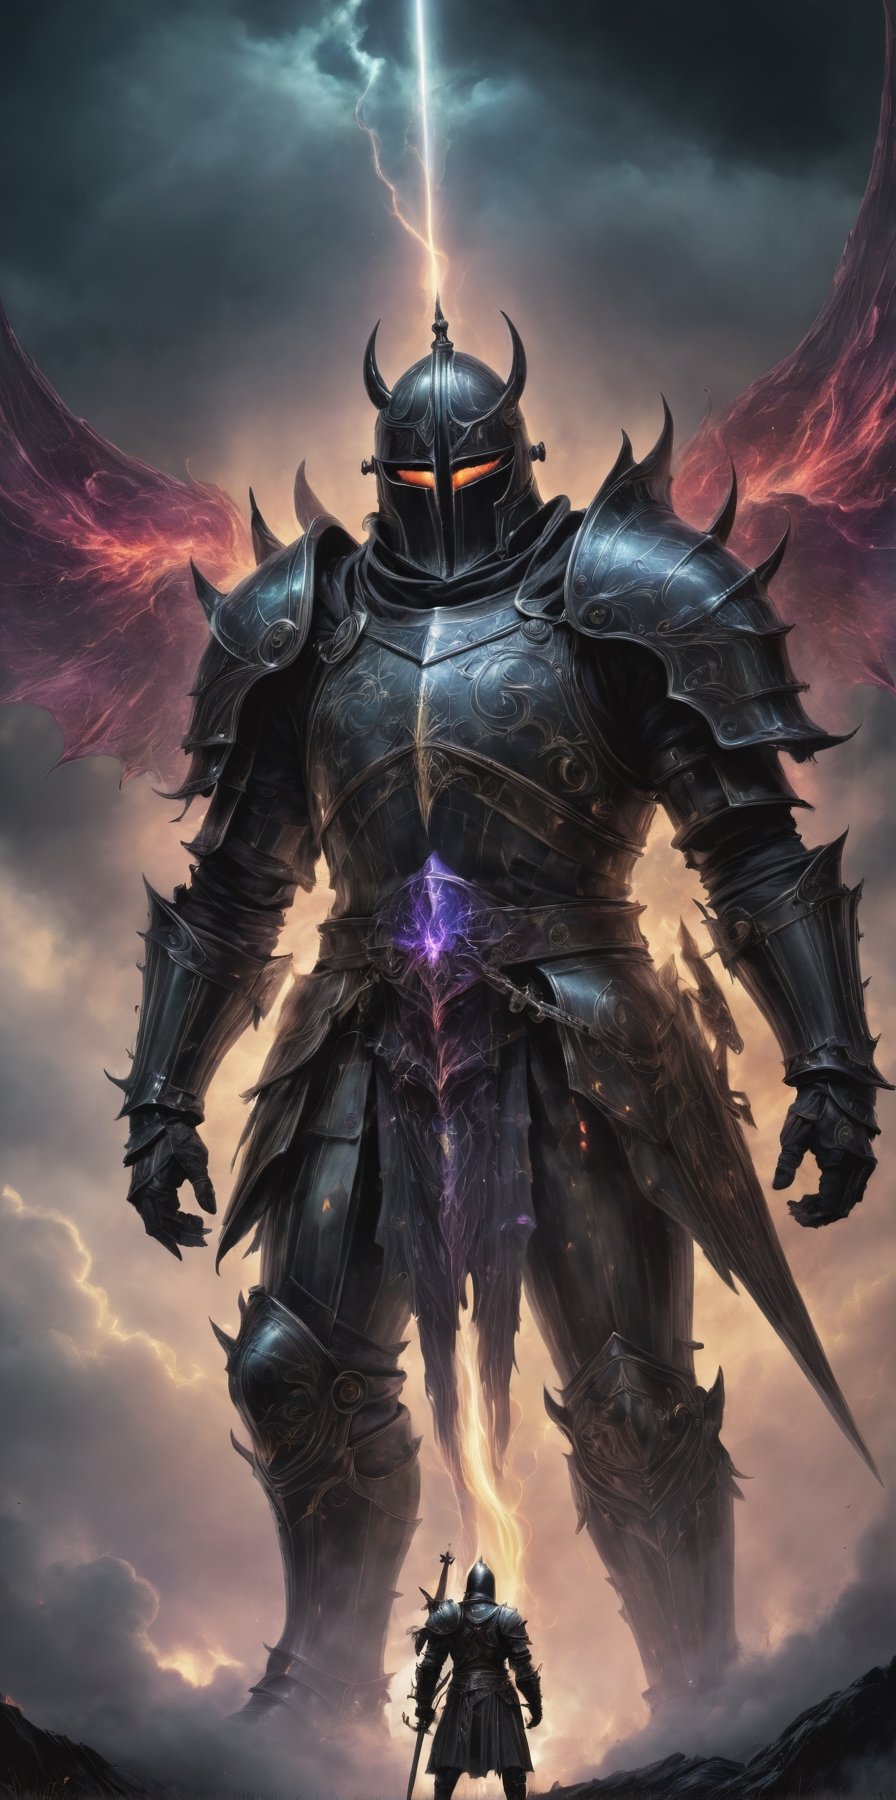 (celestialpunkai:1.3) {(s0lar:1.3) | (lun4r:1.3) | (st3llar:1.3)} {  army },a knight facing a gothic  big demon showing in the back in the clouds, dark souls artstyle  (amazing, Impressive lighting, vibrant colors, complex scene  ,Ultra Realistic, trending on artstation,     exaggerated, detailed background:1.1)                           ,steampunk style